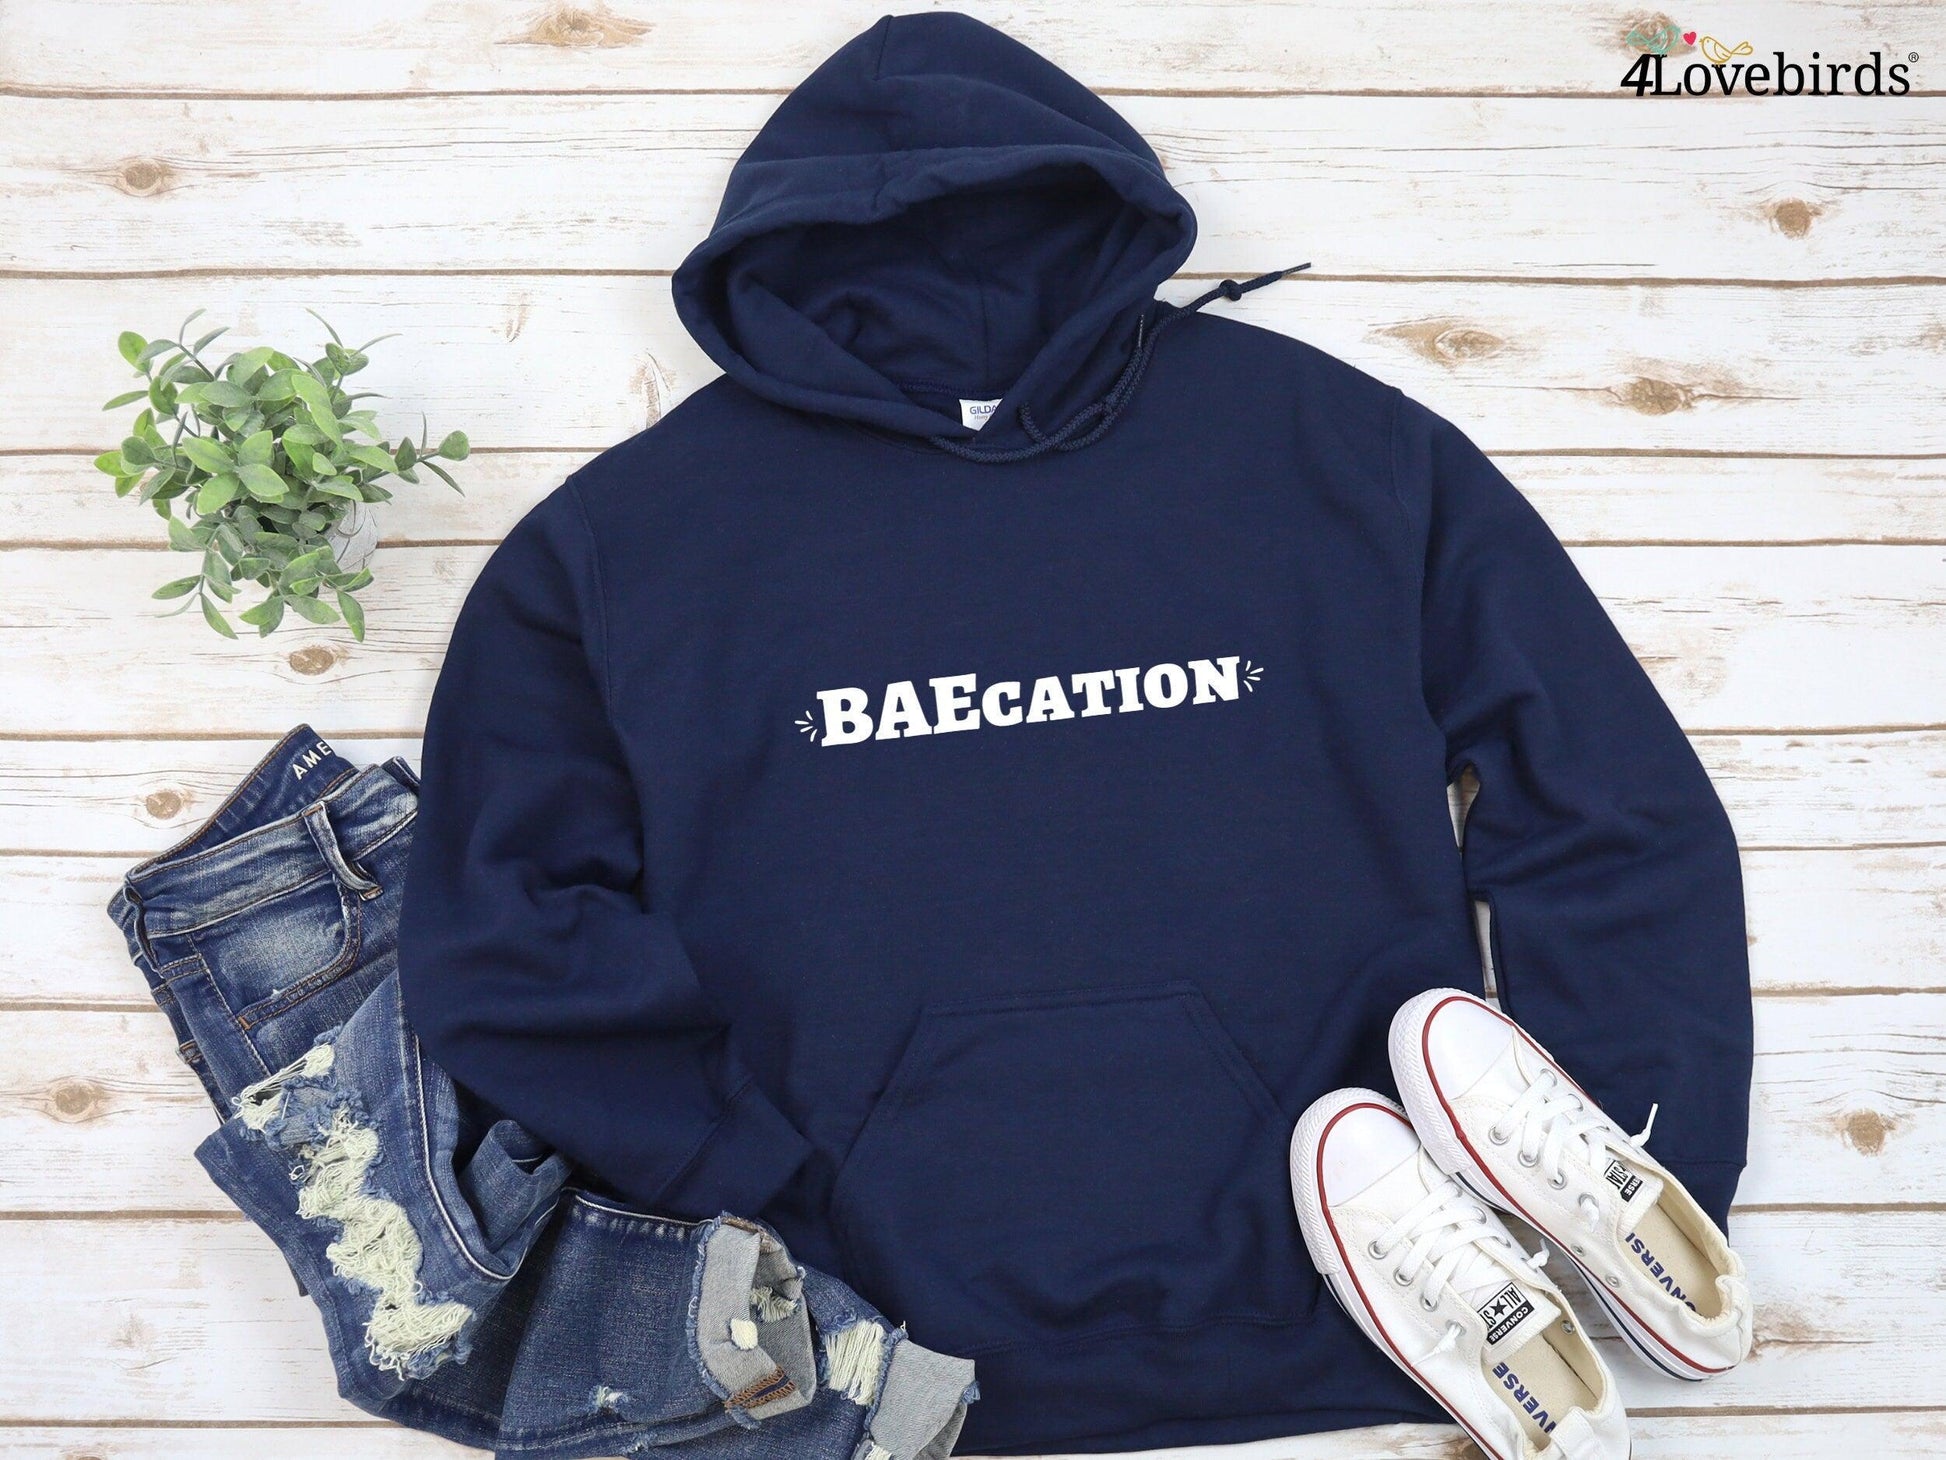 Baecation Hoodie, Baecation Vibes Sweatshirt, Power Couple Long Sleeve Shirt, Matching Couple Shirt, Honeymoon Gifts, Gifts For Couples - 4Lovebirds